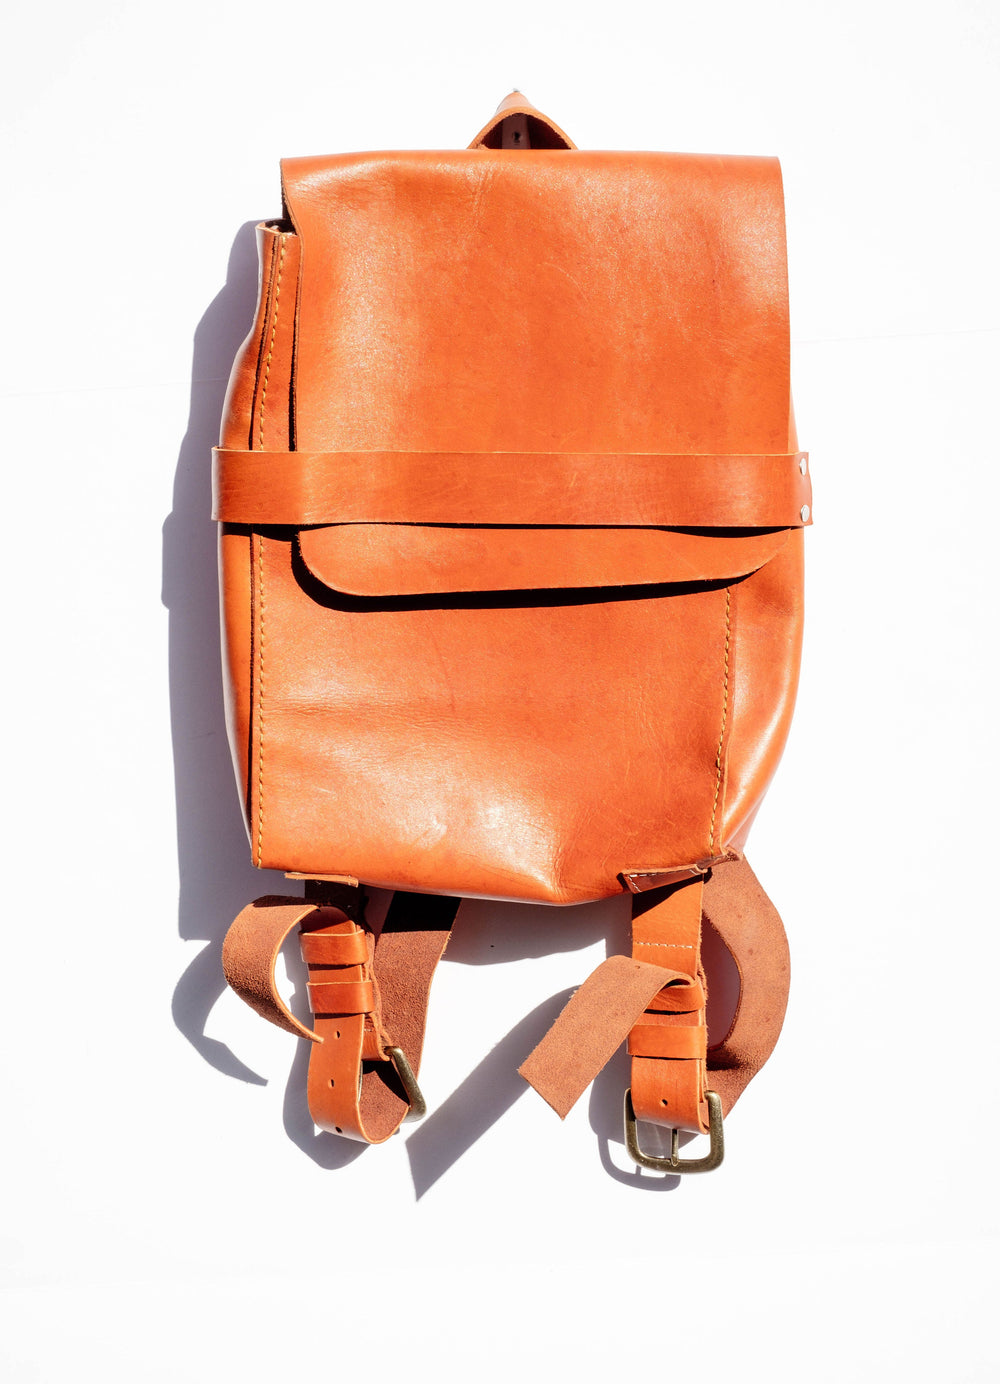 The Simon Leather Backpack by 2nd Story Goods